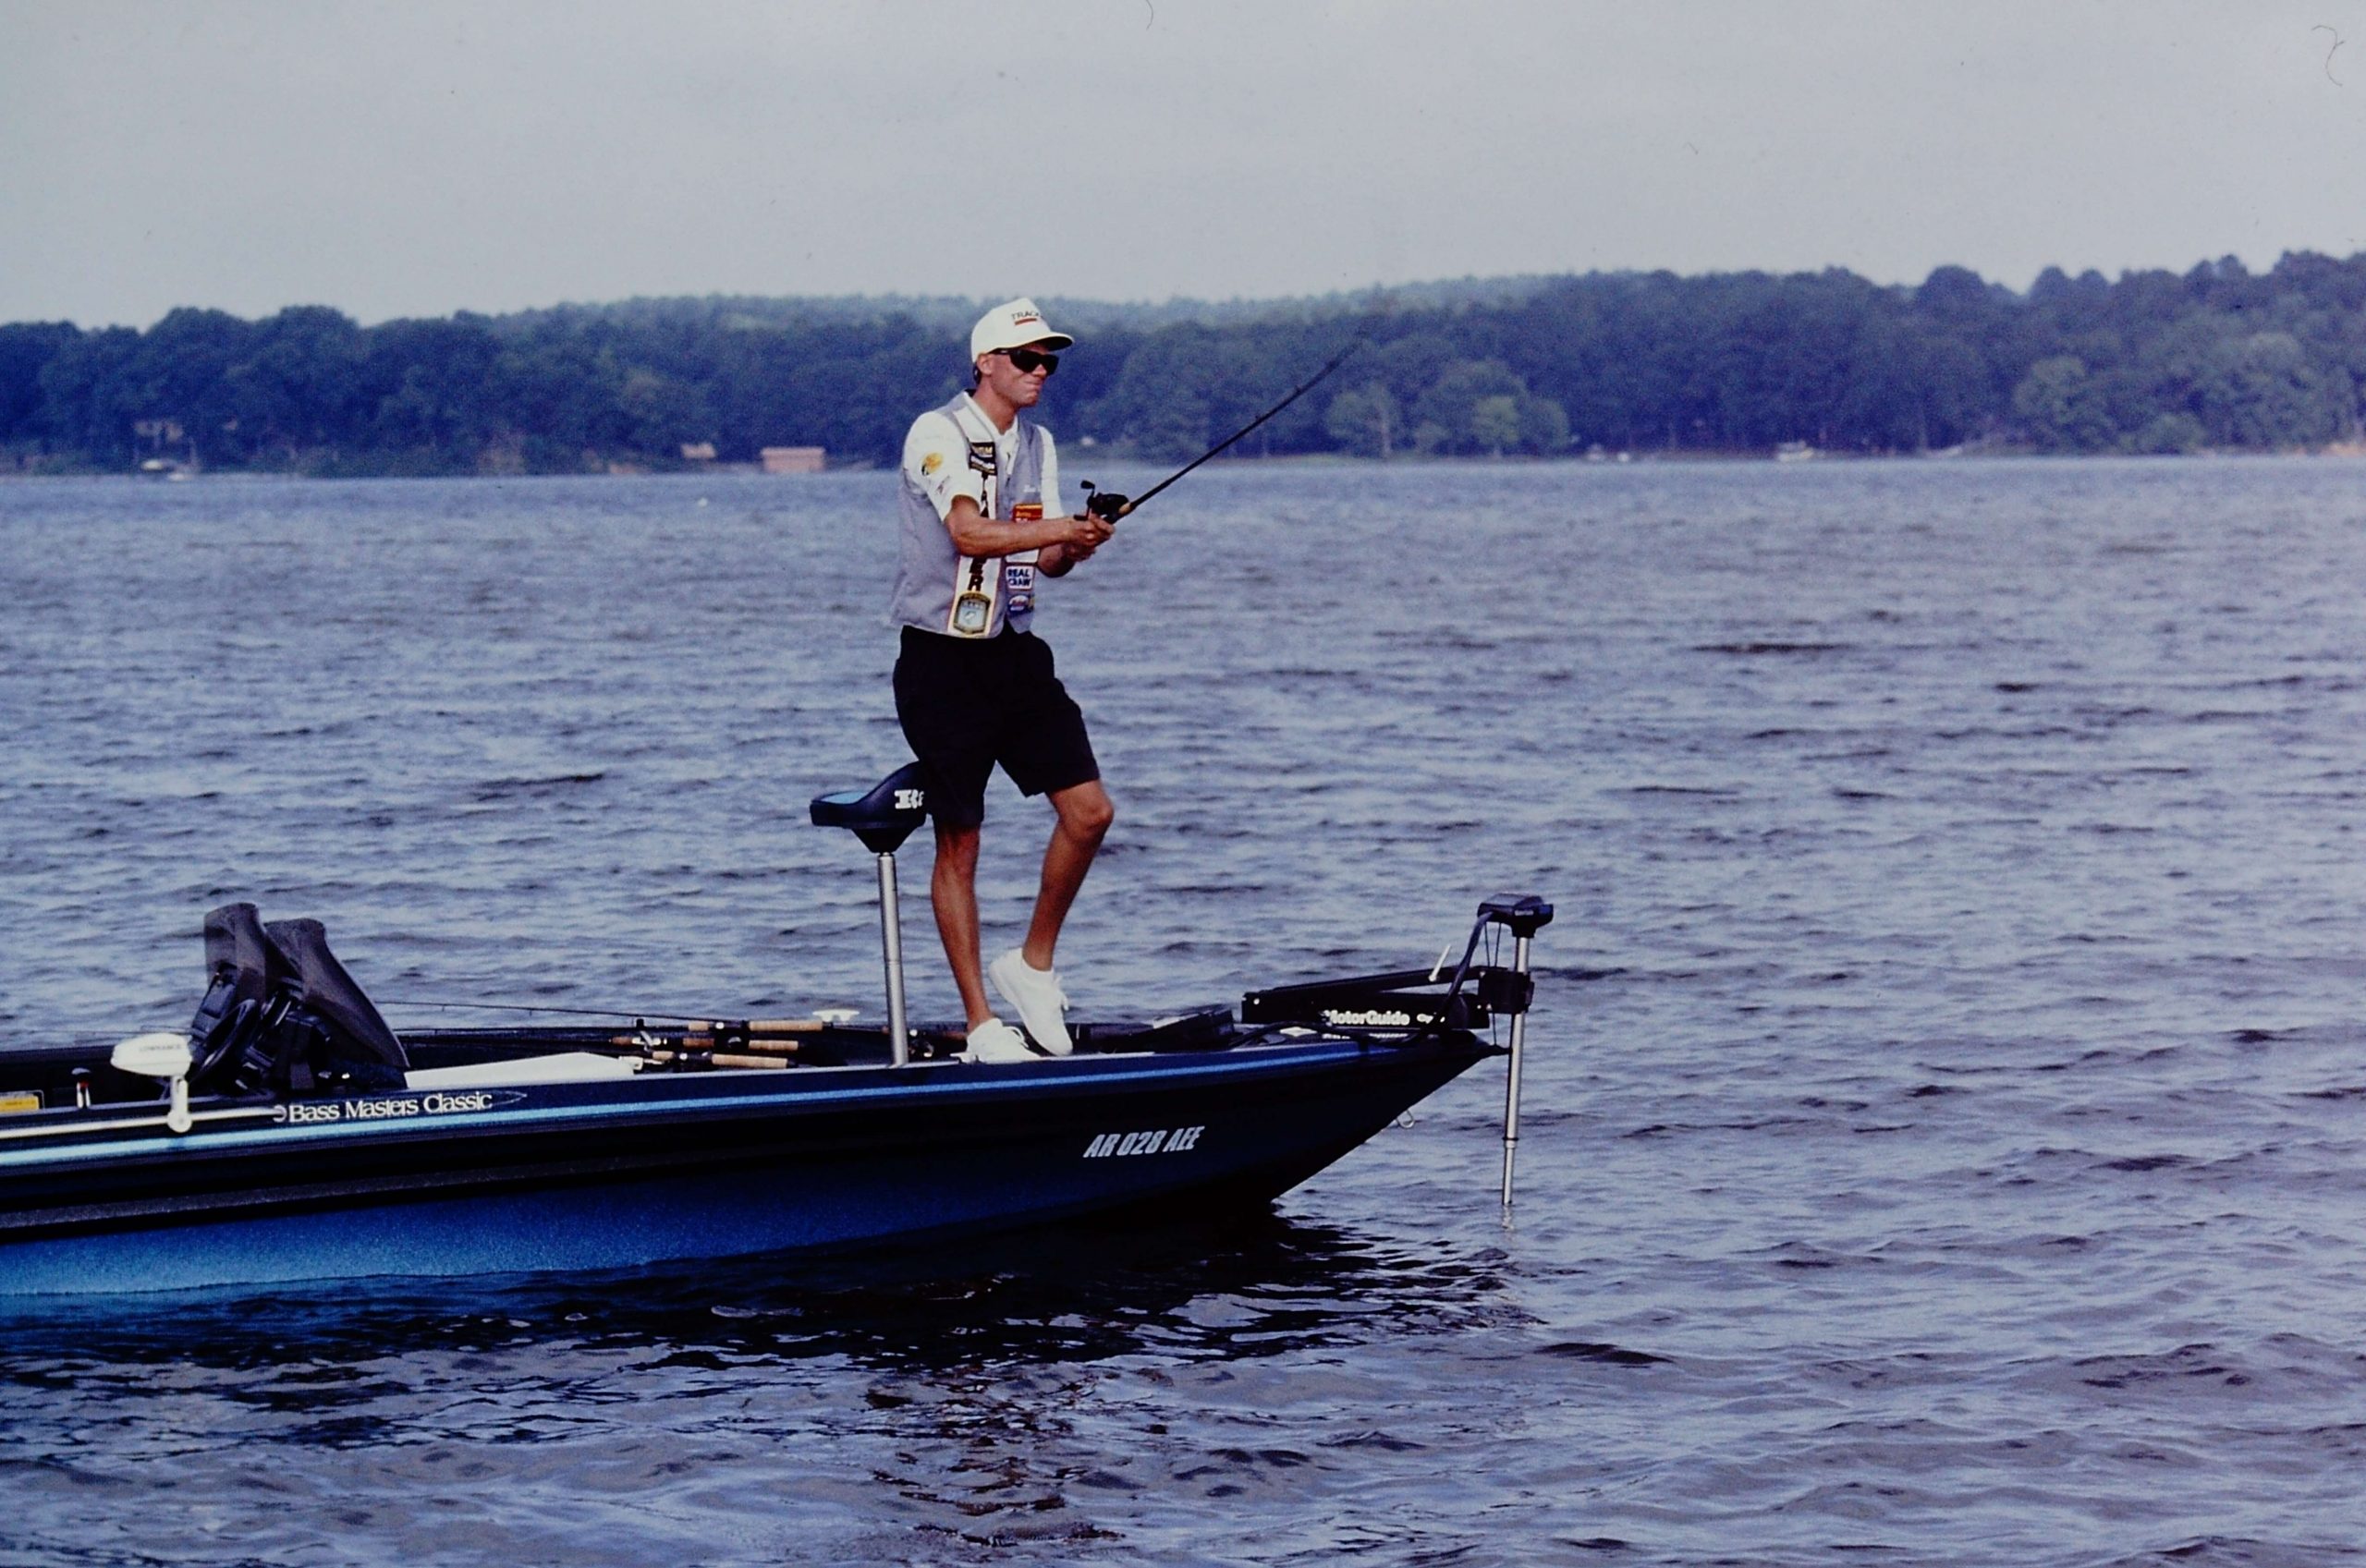 <b>1992</b><br>The young Michigan angler quickly became a household name as a dominant competitor. At the age of 24, he remains the youngest angler to win an AOY title.